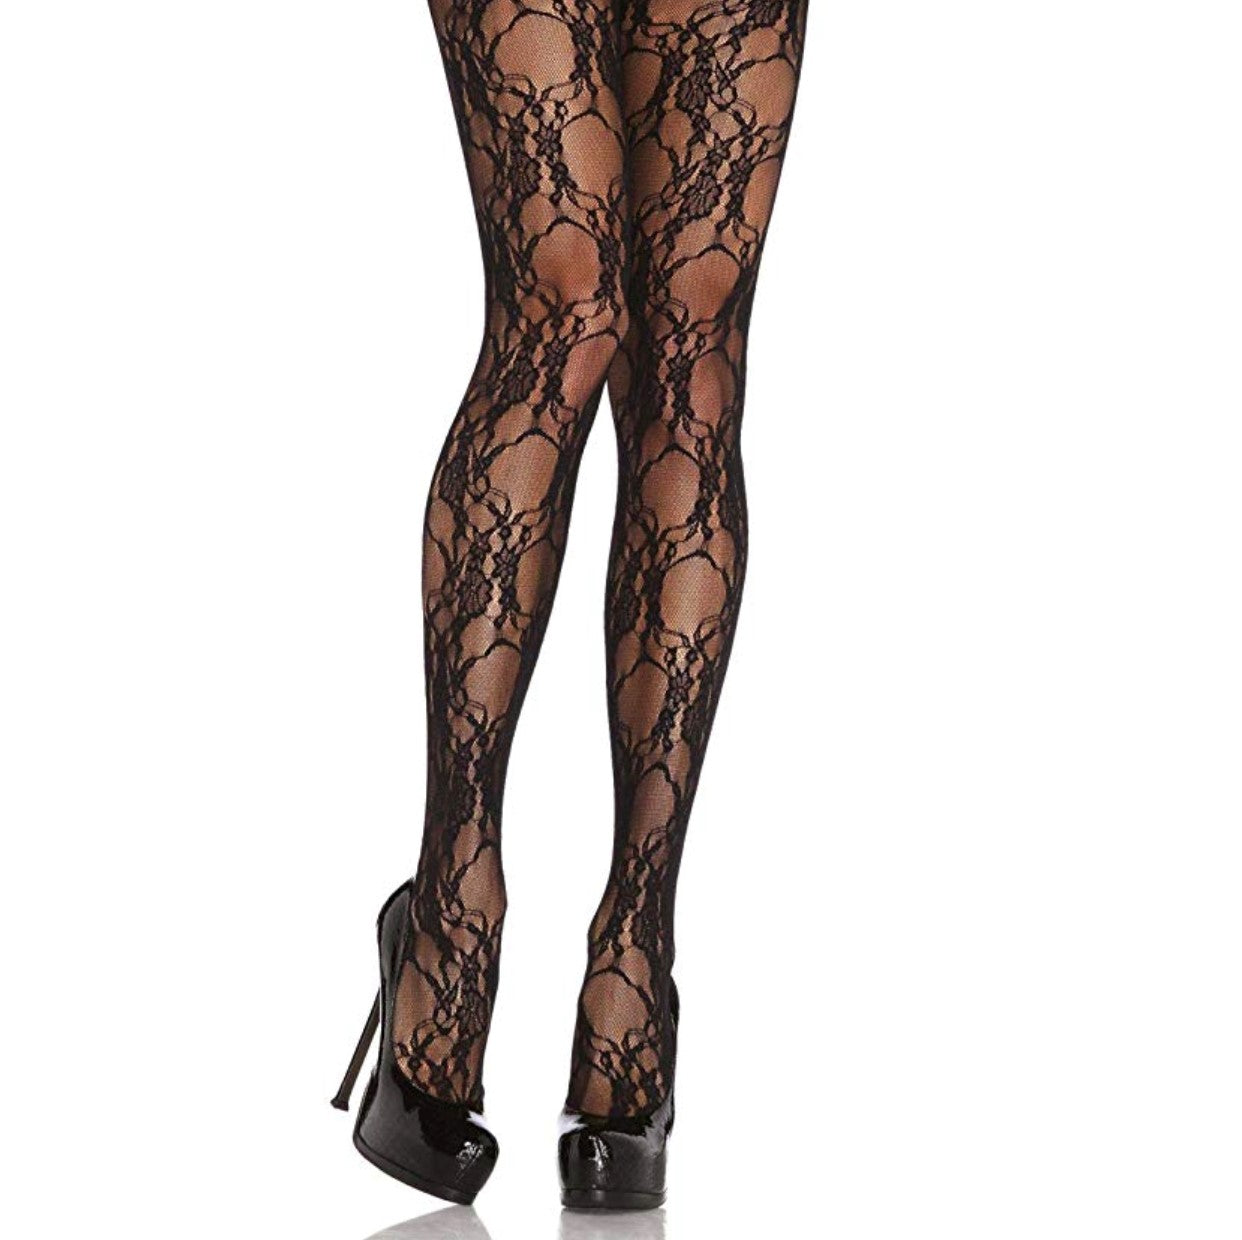 Black Floral Lace Stockings With Lace Top